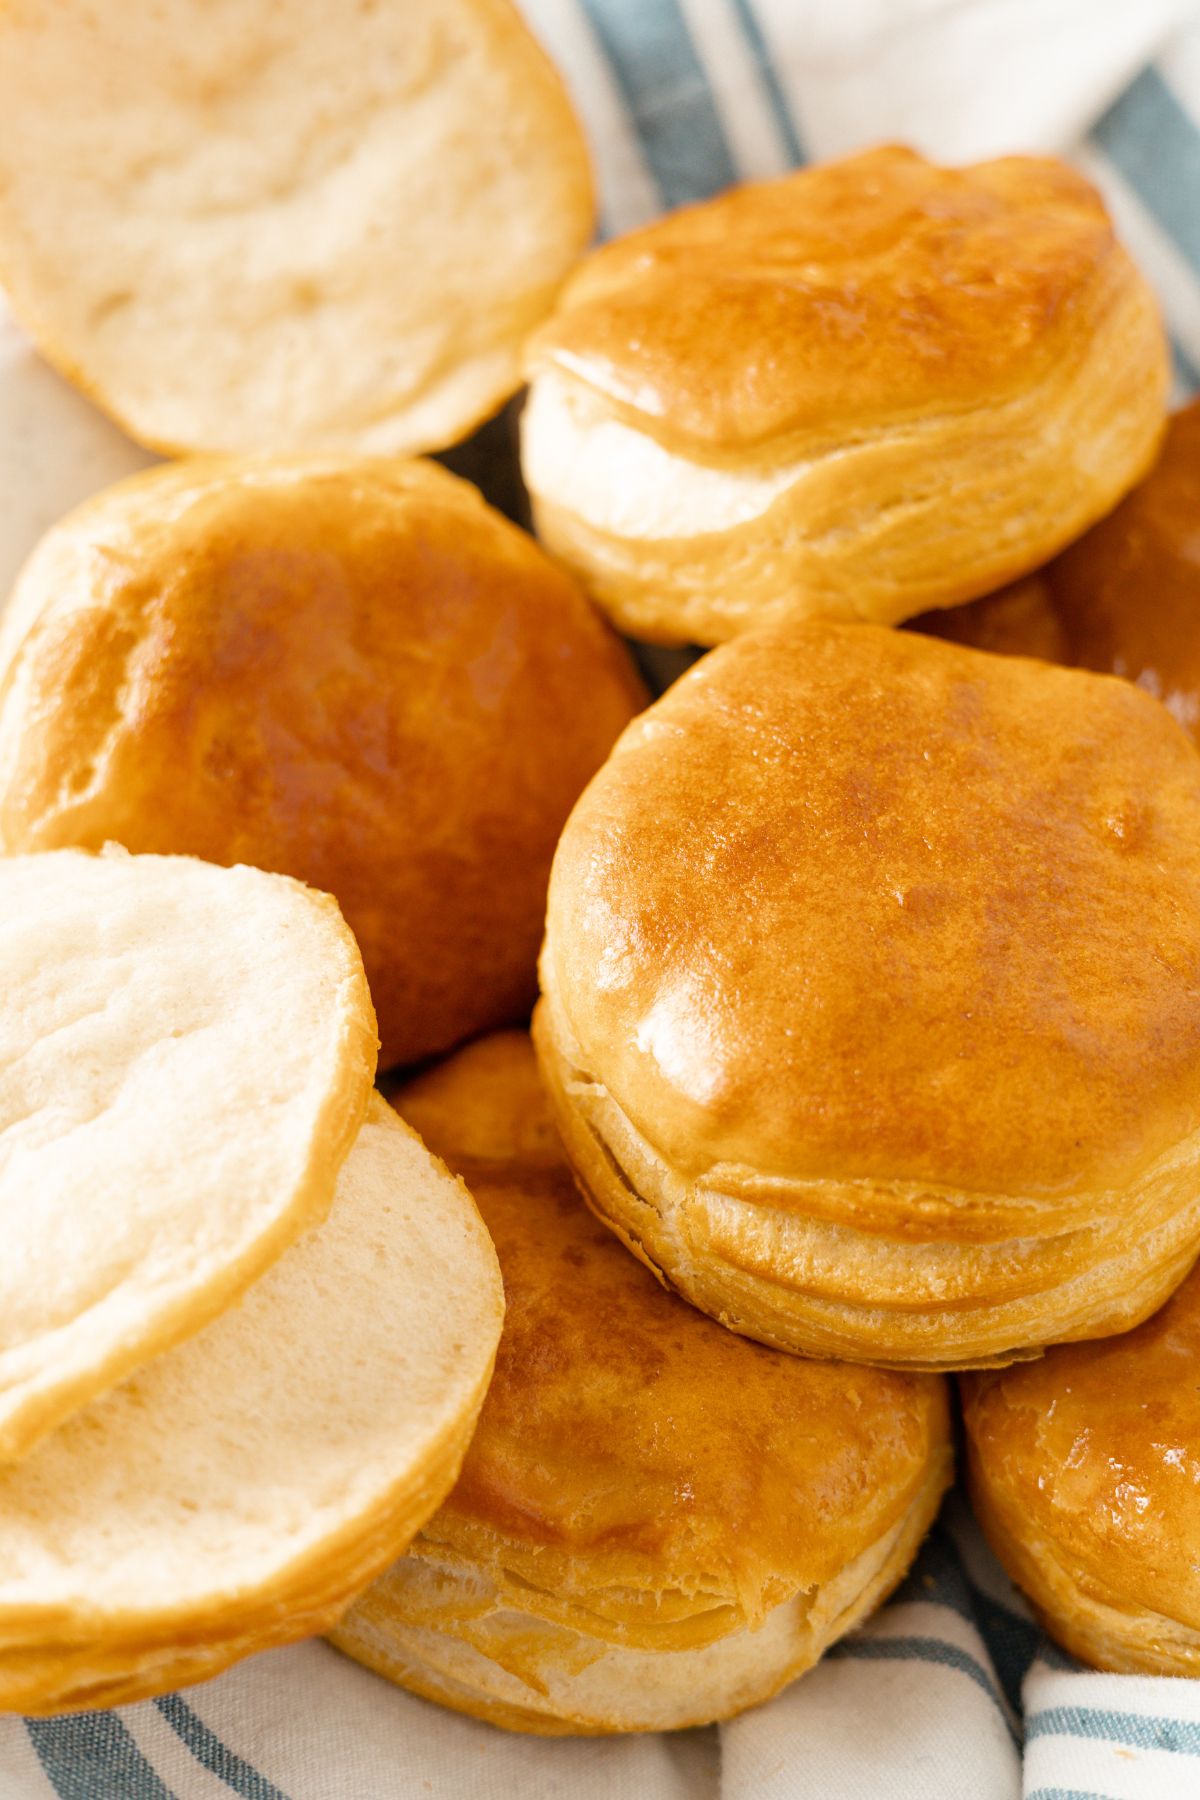 Biscuits cooked using an air fryer